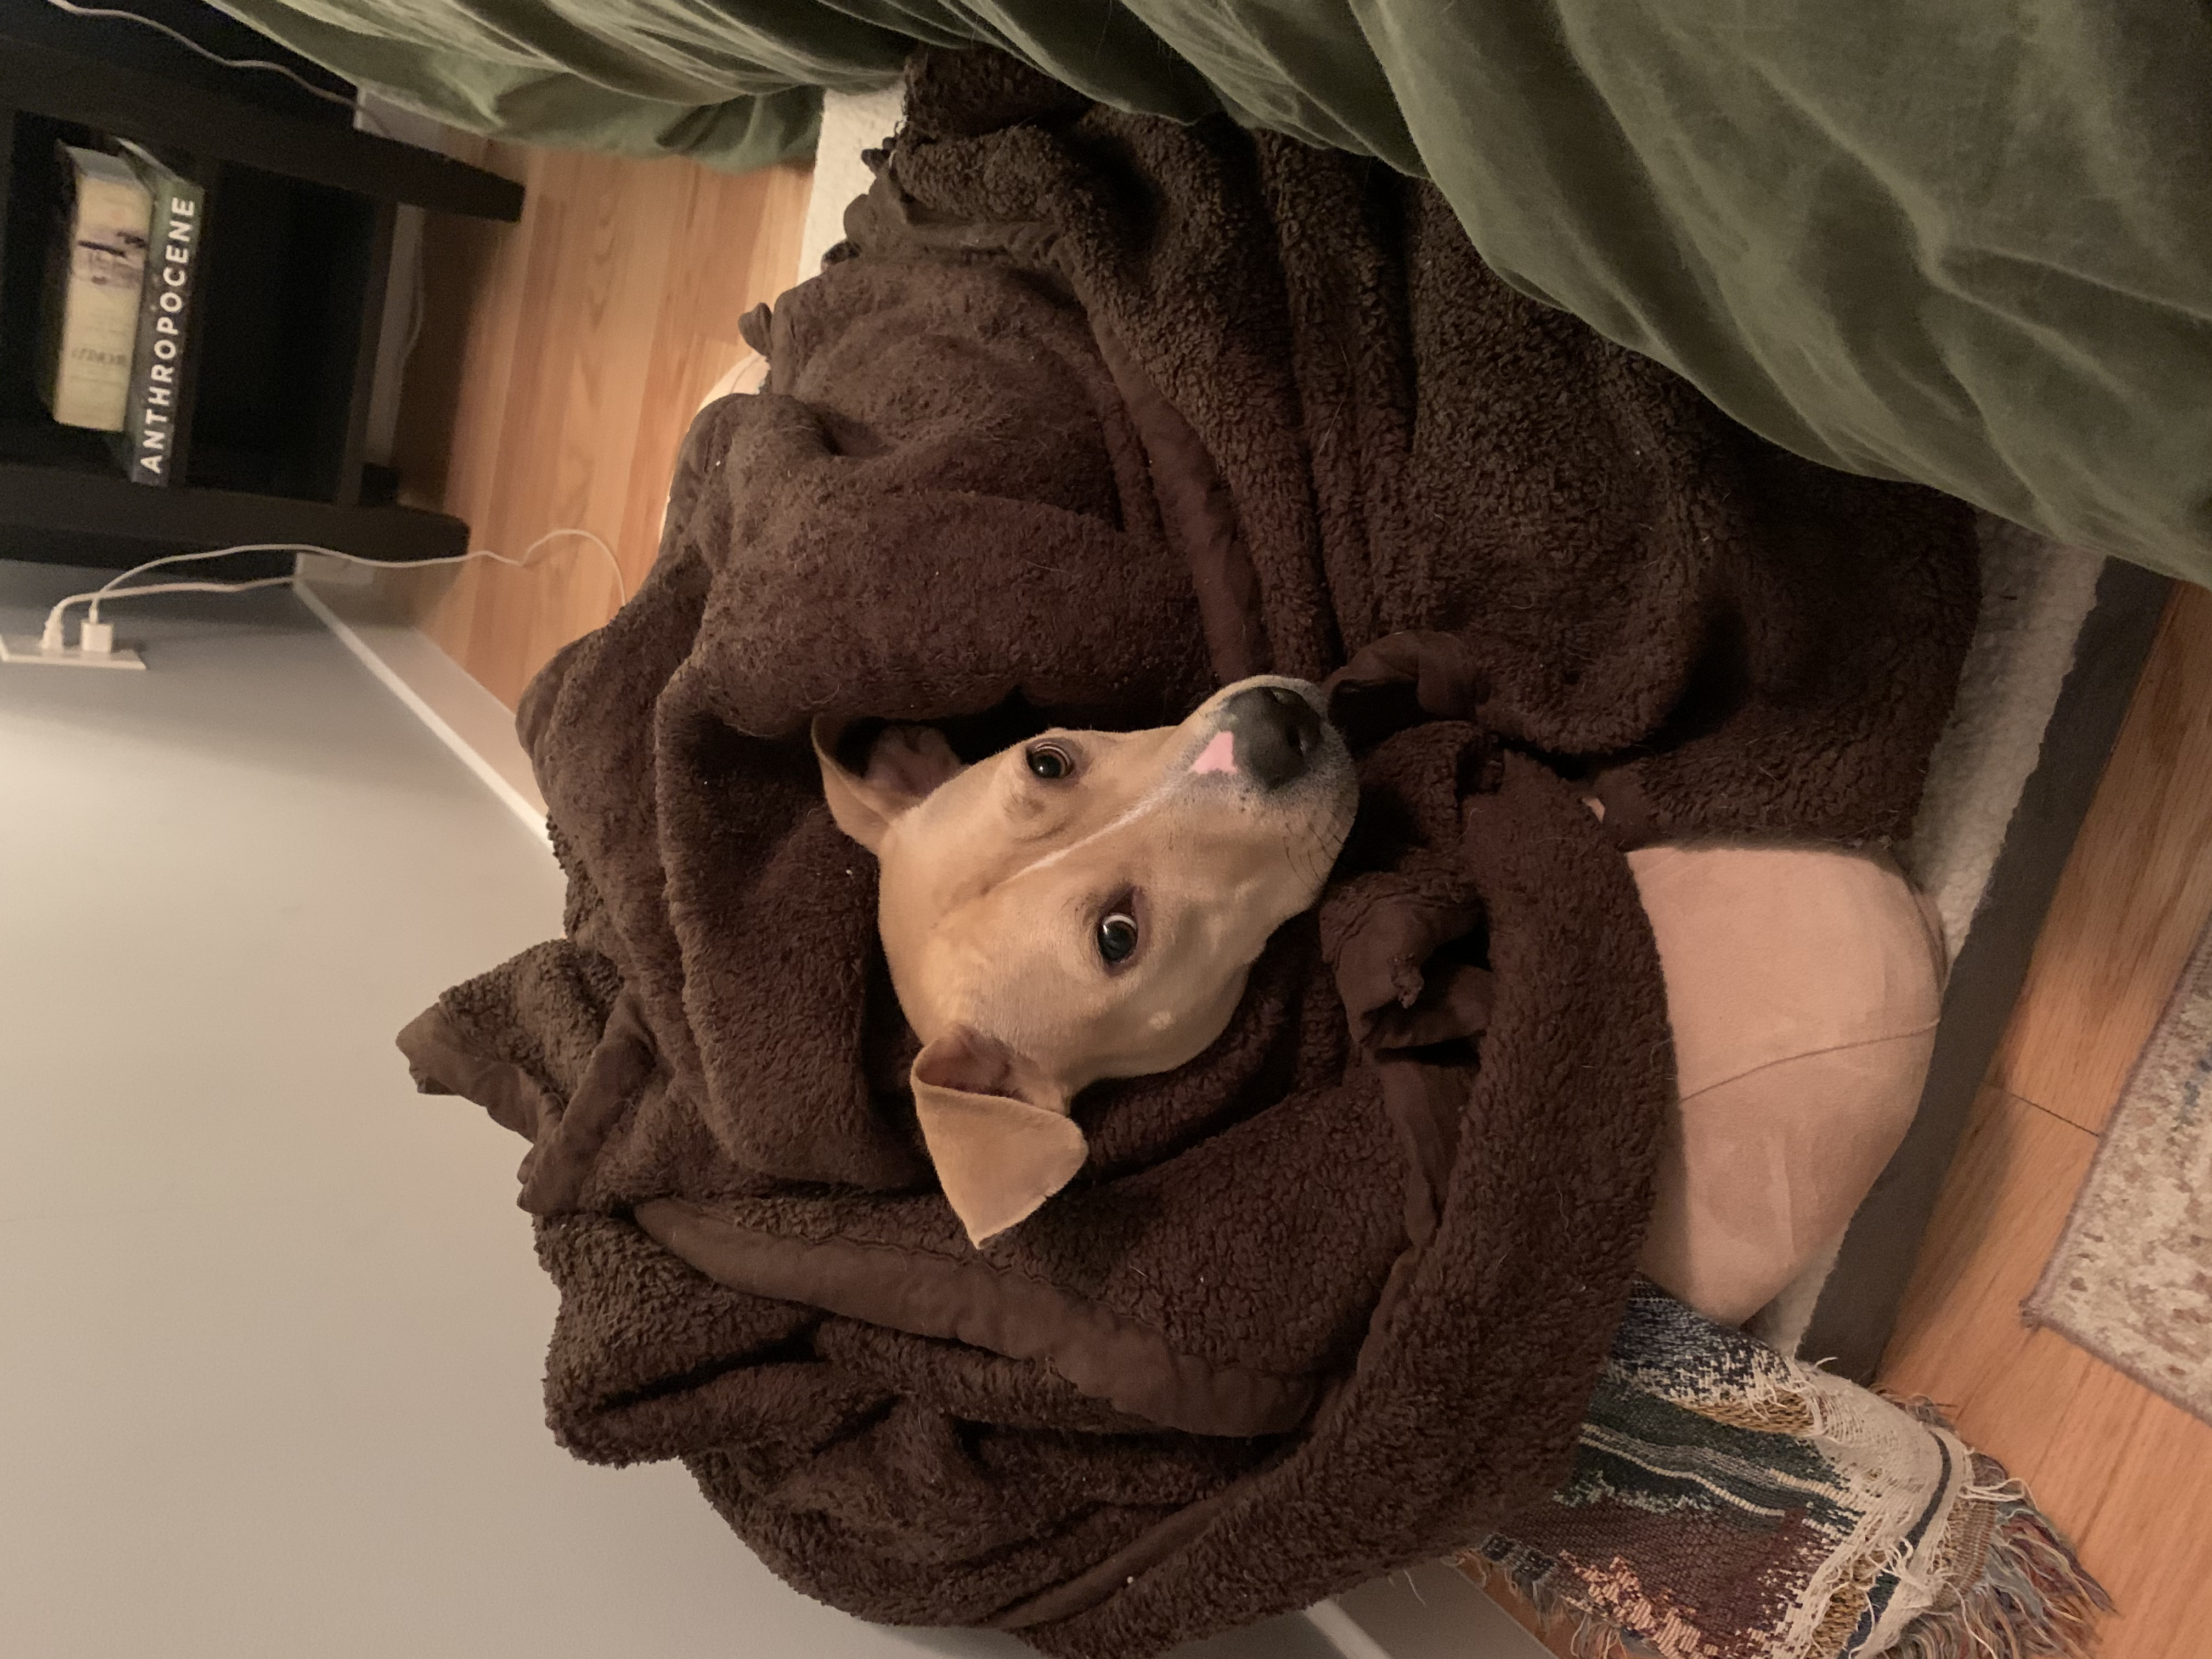 A tan and white pit bull wrapped up in a brown blanket